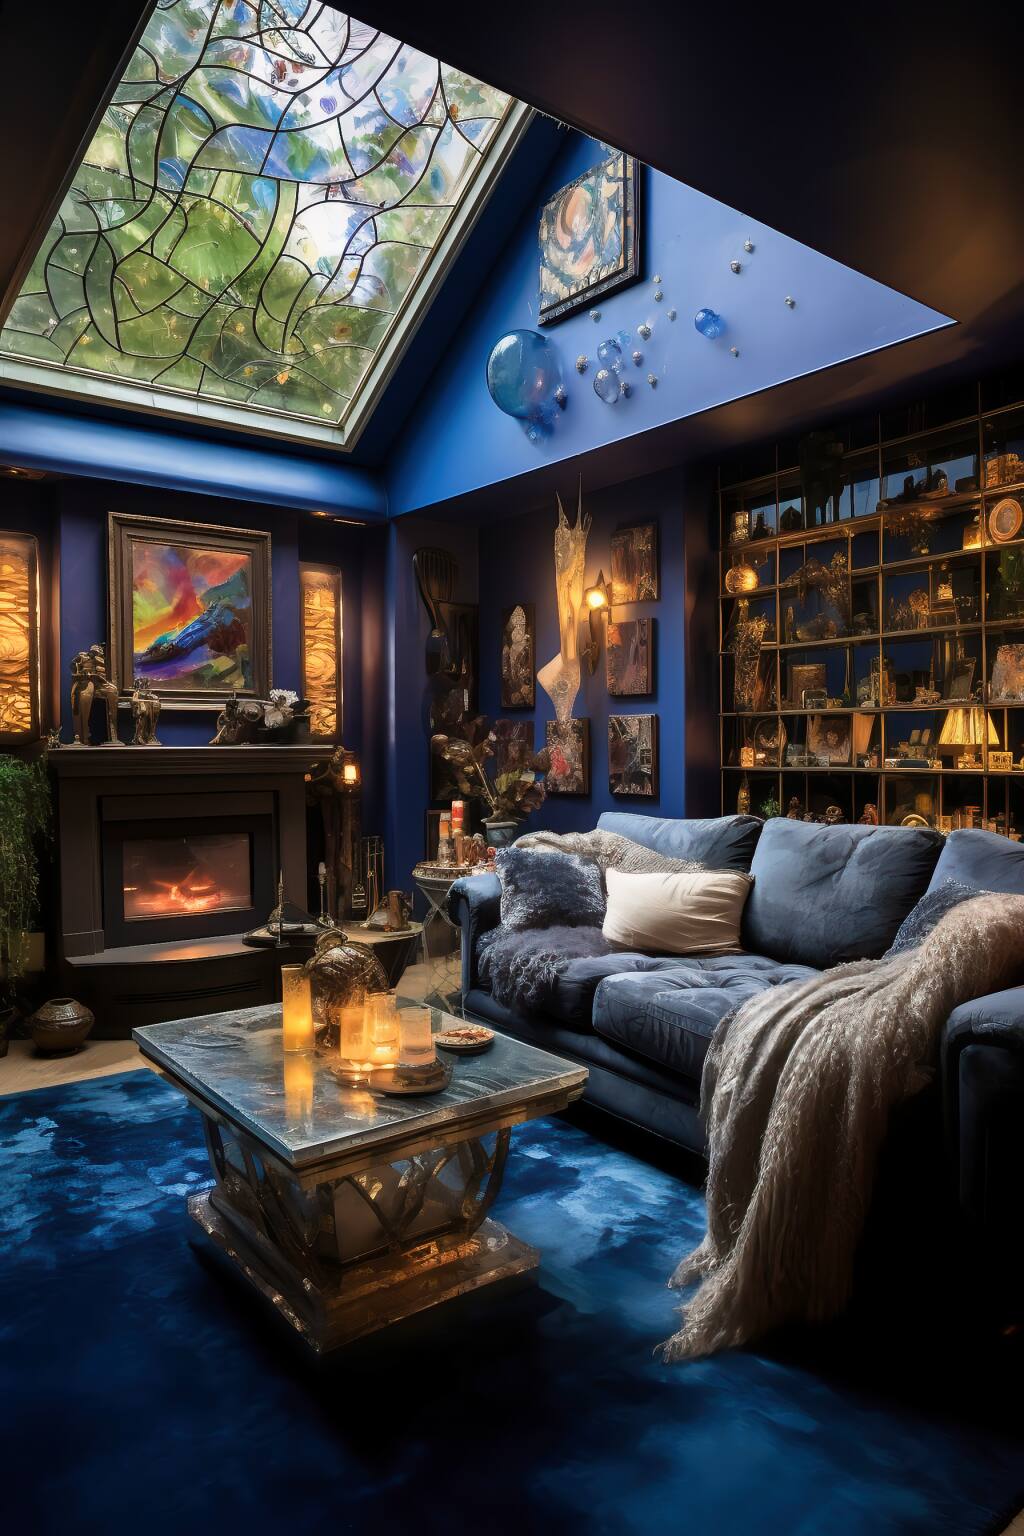 Sophisticated Bohemian Living Room In Navy And Silver, Featuring A Velvet Sofa, Glass Coffee Table, And Moonlit Wall Art.